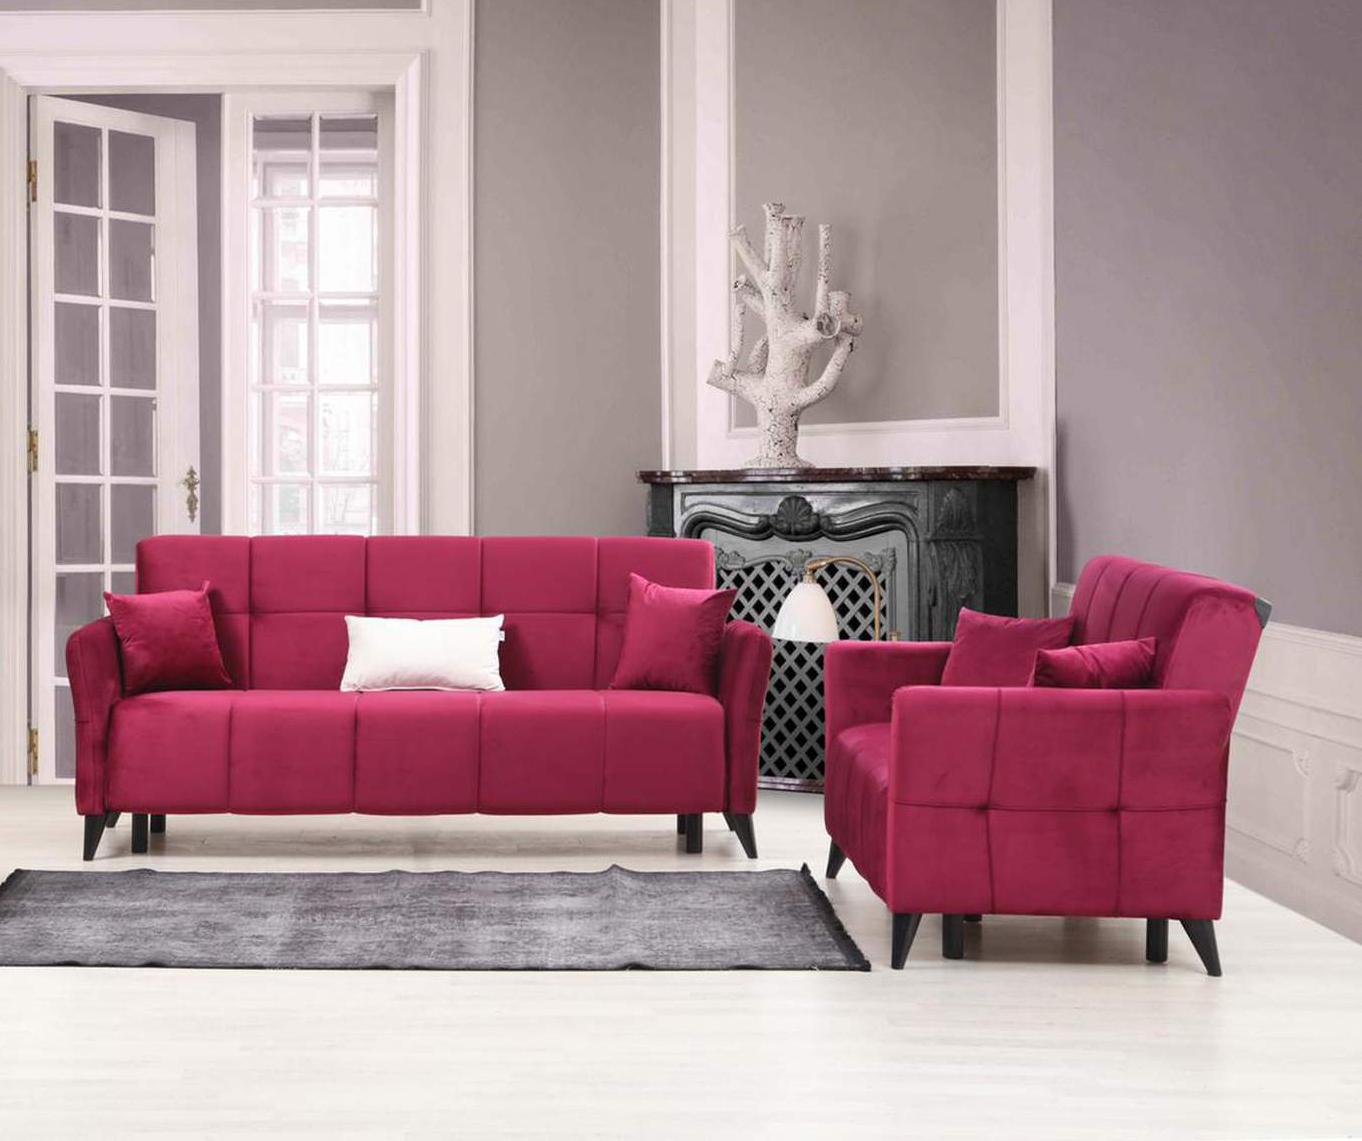 

                    
Alpha Furniture Angel Sofa Loveseat and Chair Set Burgundy Fabric Purchase 
